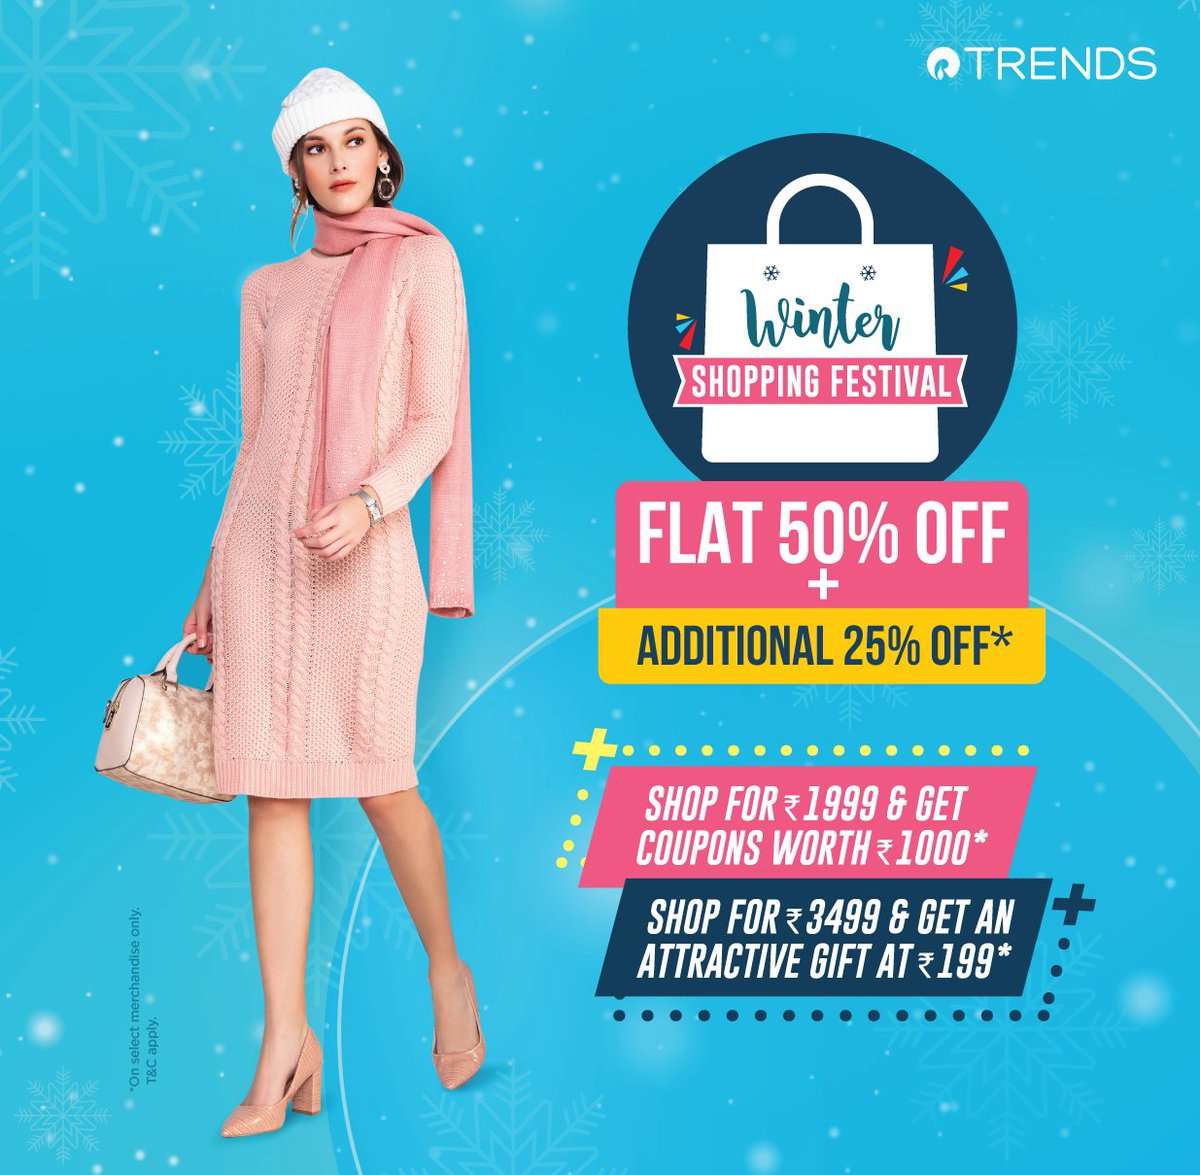 Get winter ready with the latest styles at the Trends Winter Shopping Festival Elements Mall !     Get flat 50% + additional 25% off on your favourite styles, only at select Trends store. What's more? Shop above ₹1999 and get exciting coupons and gifts worth over ₹1000*!    *Offer valid on select merchandise in select Trends mall stores. T&C apply.    #TrendsWinterShoppingFestival #Trends #ElementsMall #Nagavara #Bangalore 